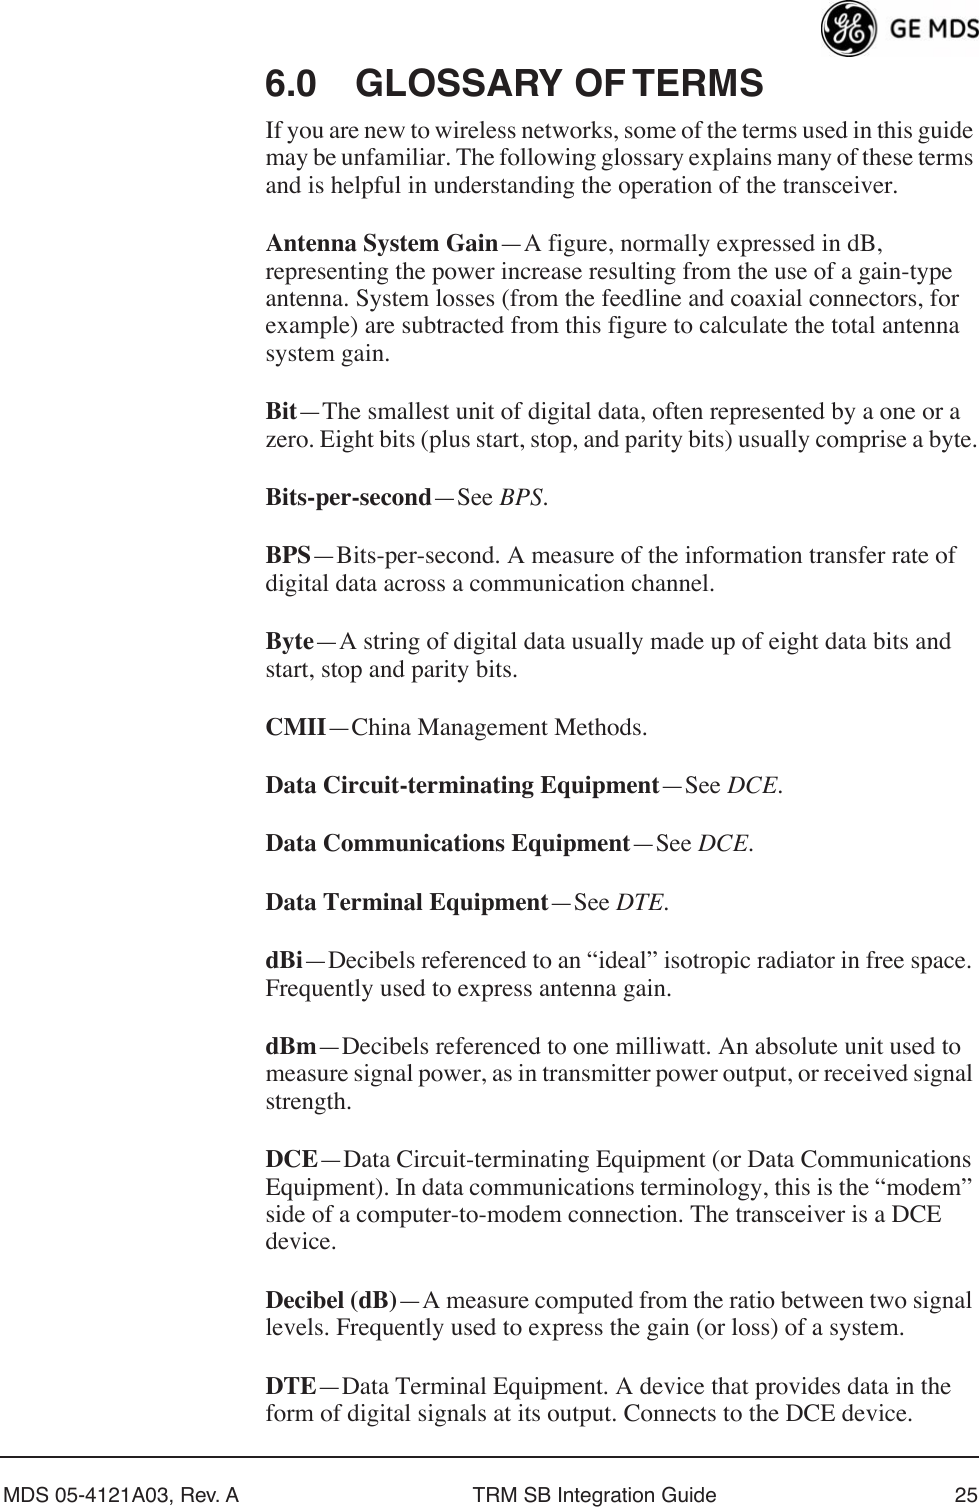 MDS 05-4121A03, Rev. A TRM SB Integration Guide 256.0 GLOSSARY OF TERMSIf you are new to wireless networks, some of the terms used in this guide may be unfamiliar. The following glossary explains many of these terms and is helpful in understanding the operation of the transceiver.Antenna System Gain—A figure, normally expressed in dB, representing the power increase resulting from the use of a gain-type antenna. System losses (from the feedline and coaxial connectors, for example) are subtracted from this figure to calculate the total antenna system gain.Bit—The smallest unit of digital data, often represented by a one or a zero. Eight bits (plus start, stop, and parity bits) usually comprise a byte.Bits-per-second—See BPS.BPS—Bits-per-second. A measure of the information transfer rate of digital data across a communication channel.Byte—A string of digital data usually made up of eight data bits and start, stop and parity bits.CMII—China Management Methods.Data Circuit-terminating Equipment—See DCE.Data Communications Equipment—See DCE.Data Terminal Equipment—See DTE.dBi—Decibels referenced to an “ideal” isotropic radiator in free space. Frequently used to express antenna gain.dBm—Decibels referenced to one milliwatt. An absolute unit used to measure signal power, as in transmitter power output, or received signal strength.DCE—Data Circuit-terminating Equipment (or Data Communications Equipment). In data communications terminology, this is the “modem” side of a computer-to-modem connection. The transceiver is a DCE device.Decibel (dB)—A measure computed from the ratio between two signal levels. Frequently used to express the gain (or loss) of a system.DTE—Data Terminal Equipment. A device that provides data in the form of digital signals at its output. Connects to the DCE device.